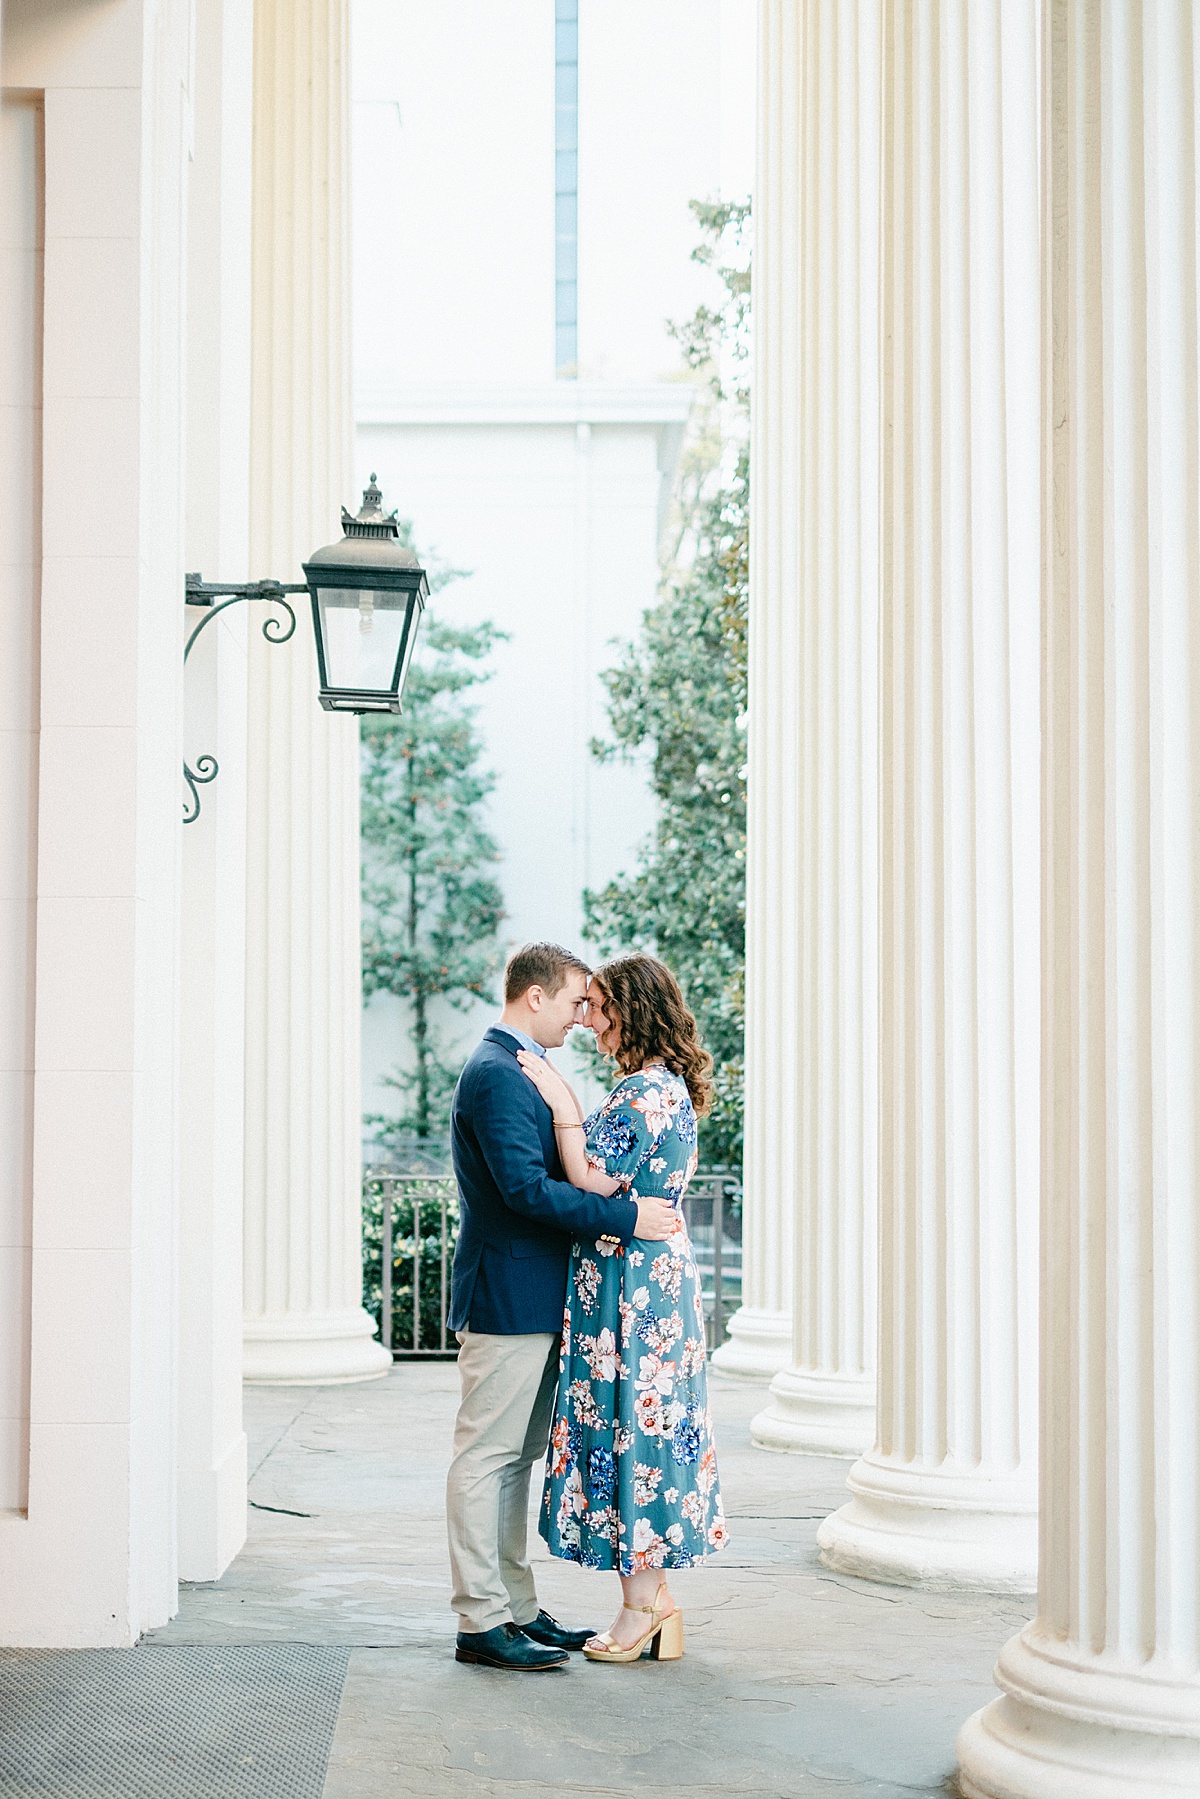 Couple embracing between columns at a Historic building at the Richmond Capitol Building grounds during engagement session